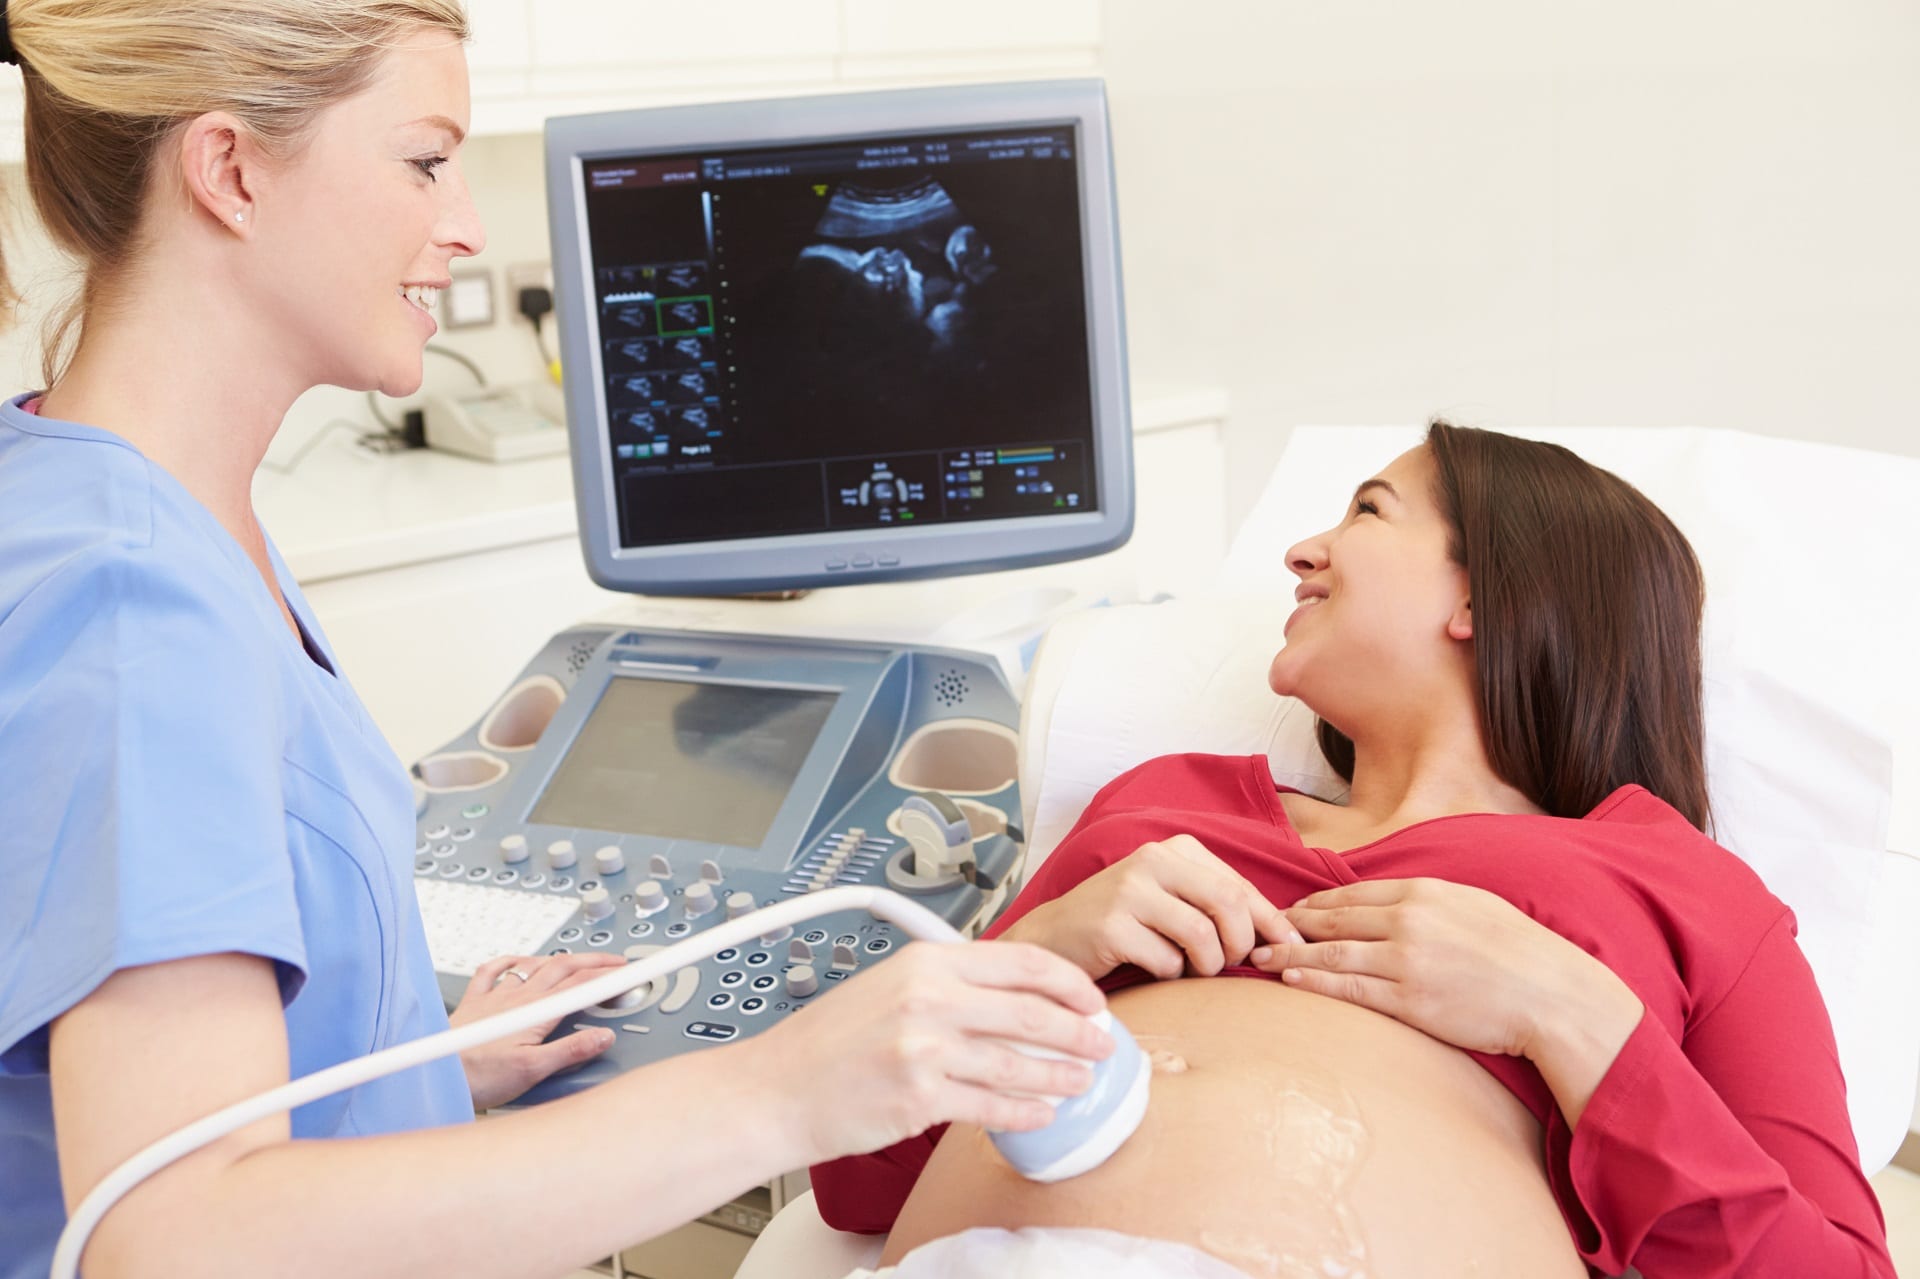 Is It Safe To Have A Transvaginal Scan For Pregnant Women - Is It Safe To Have A Transvaginal Scan For Pregnant Women?